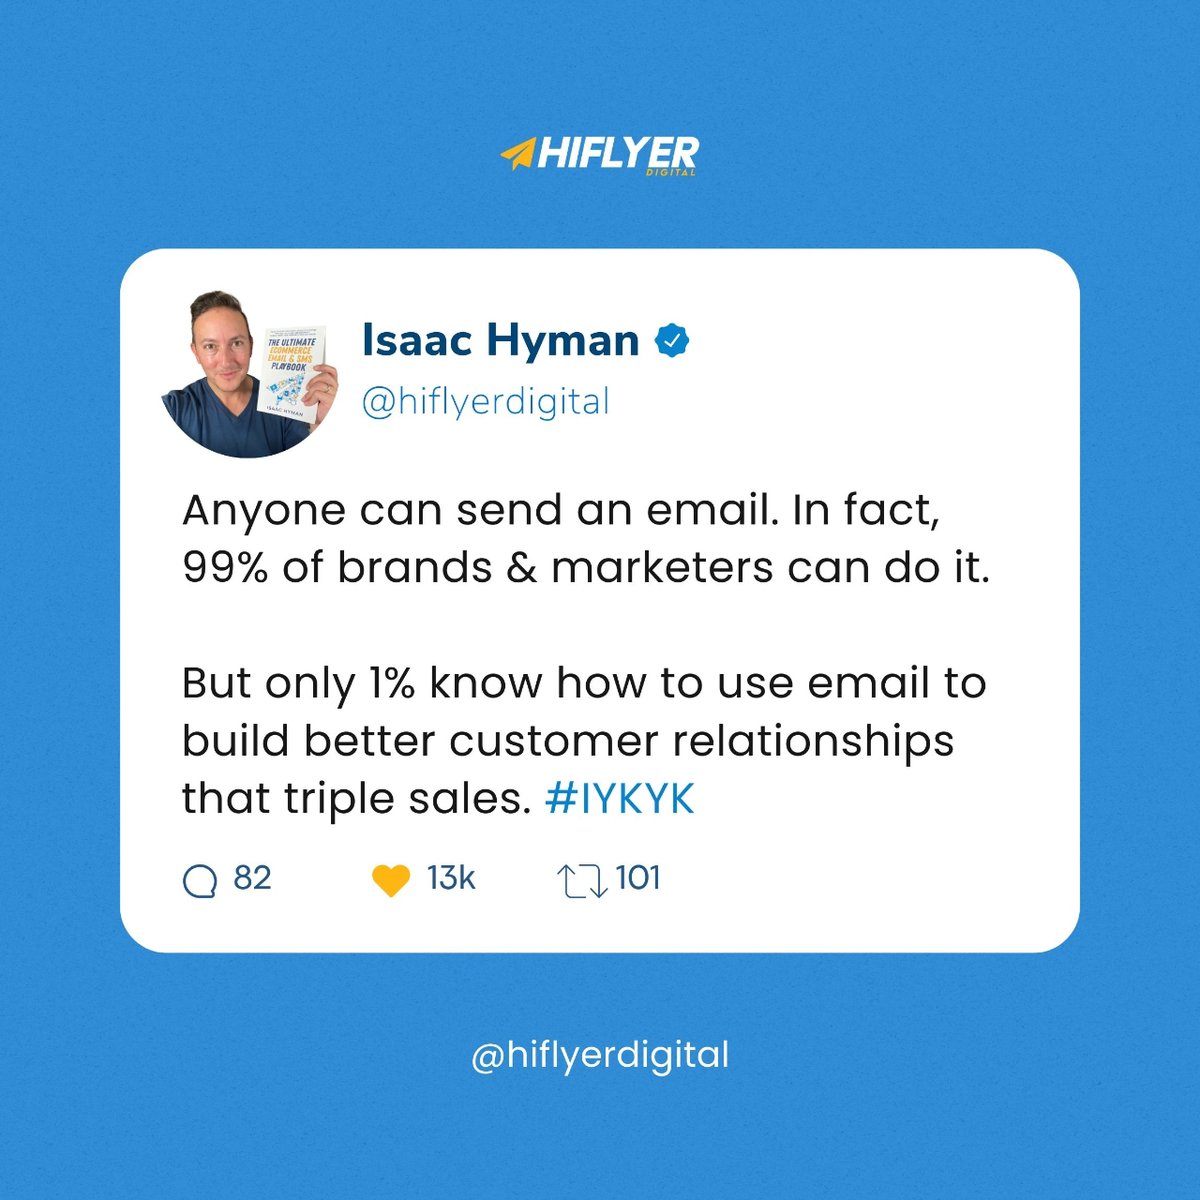 Anyone can send an email. 🥱 But only the top 1% build relationships using email and TRIPLE sales while doing it. 💪🏻

Ask yourself: what are you doing?

#emailmarketing
#smsmarketing 
#ecommercebrands